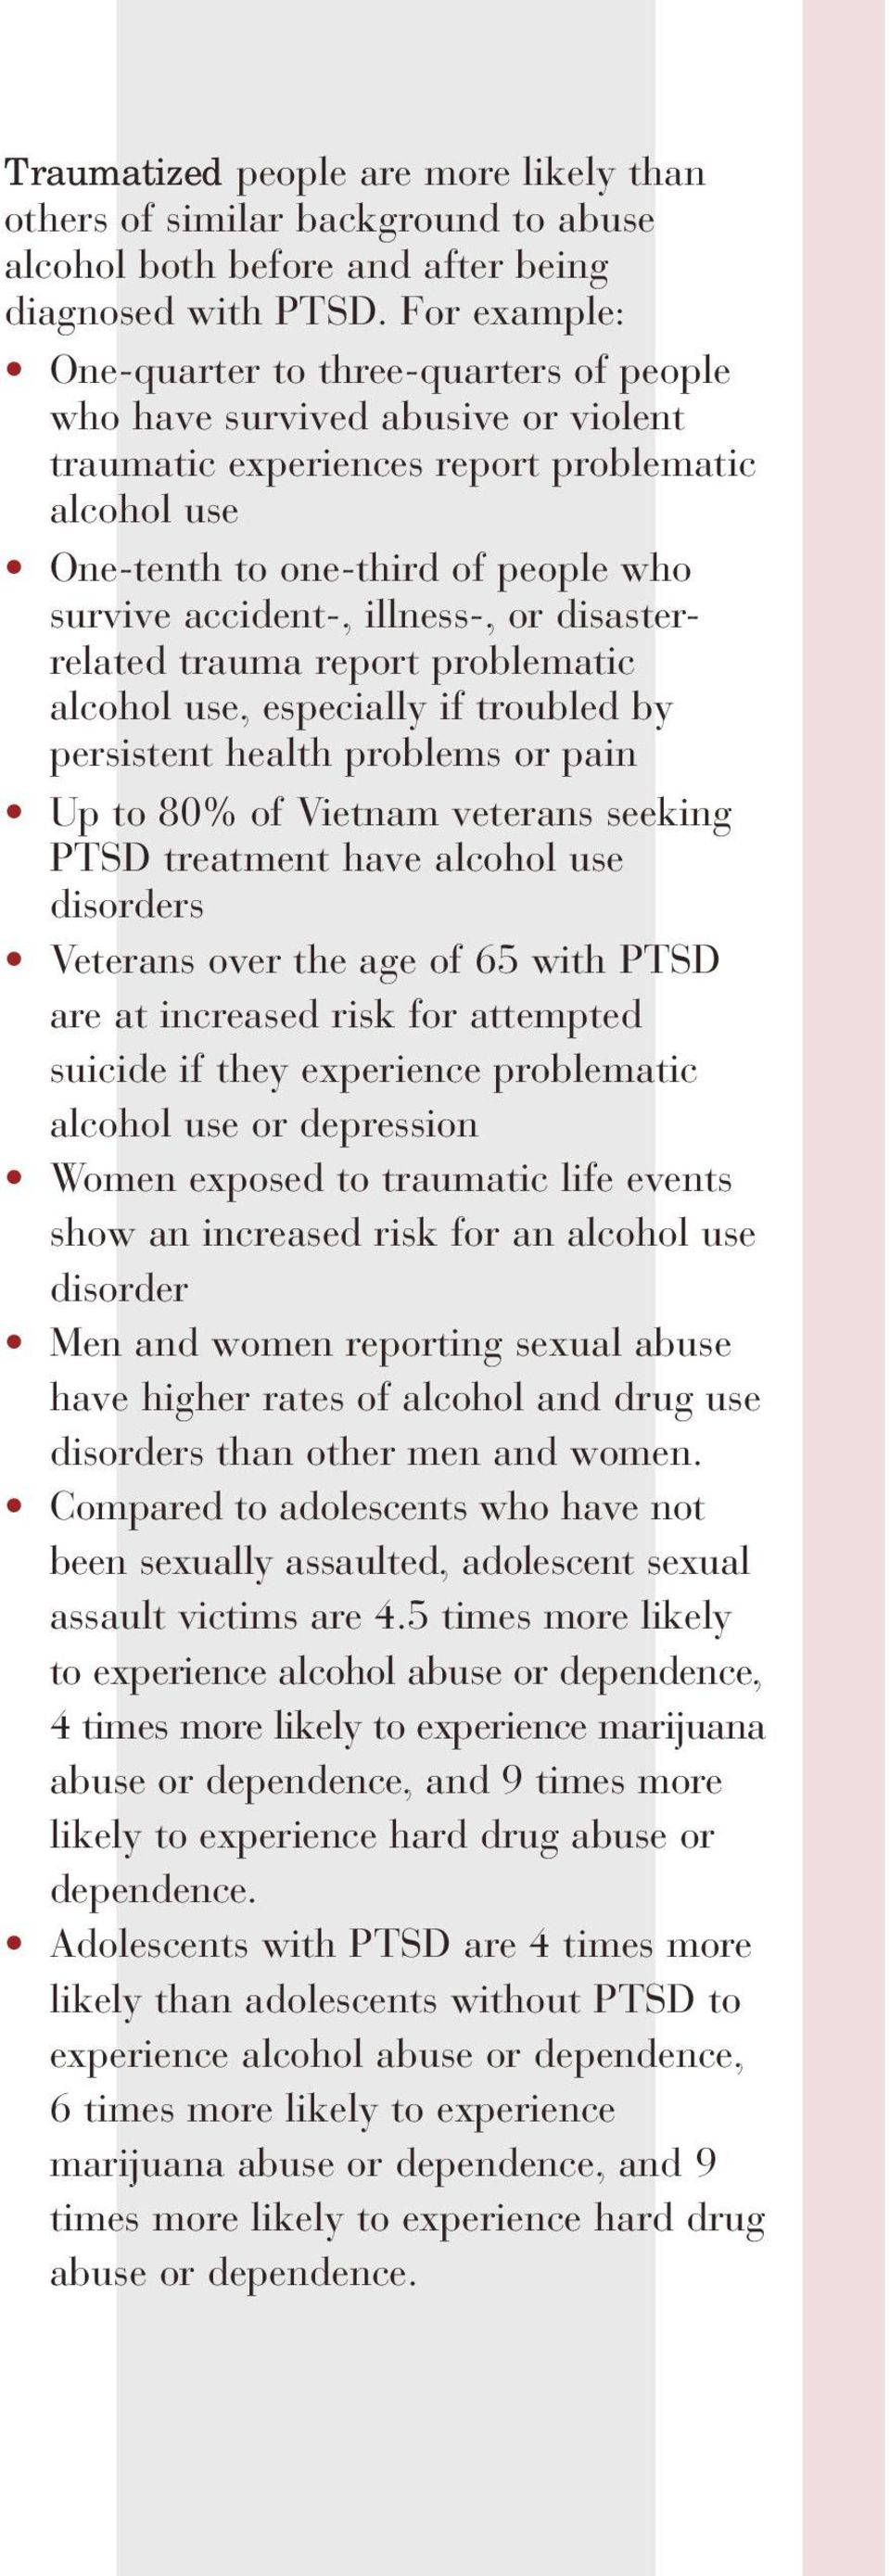 illness-, or disasterrelated trauma report problematic alcohol use, especially if troubled by persistent health problems or pain Up to 80% of Vietnam veterans seeking PTSD treatment have alcohol use